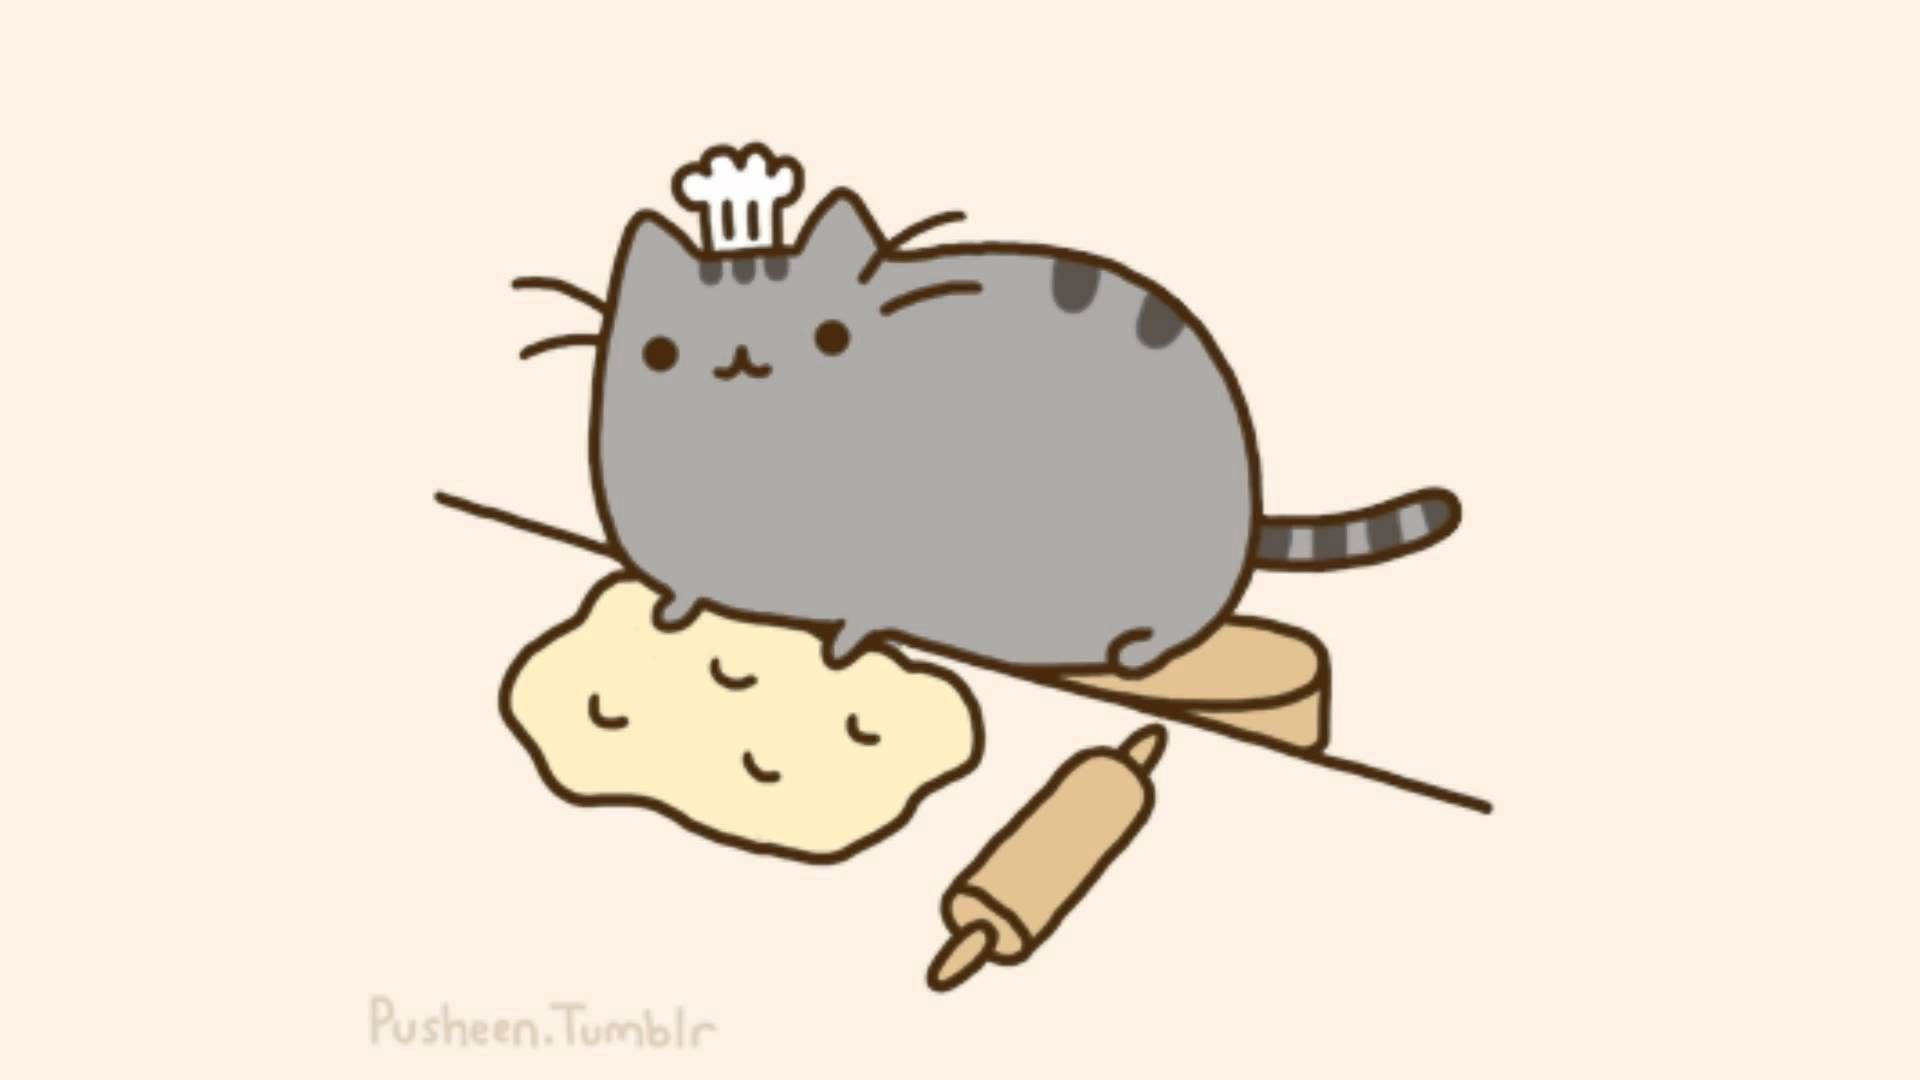 The one and only Pusheen, the Baker Cat Wallpaper